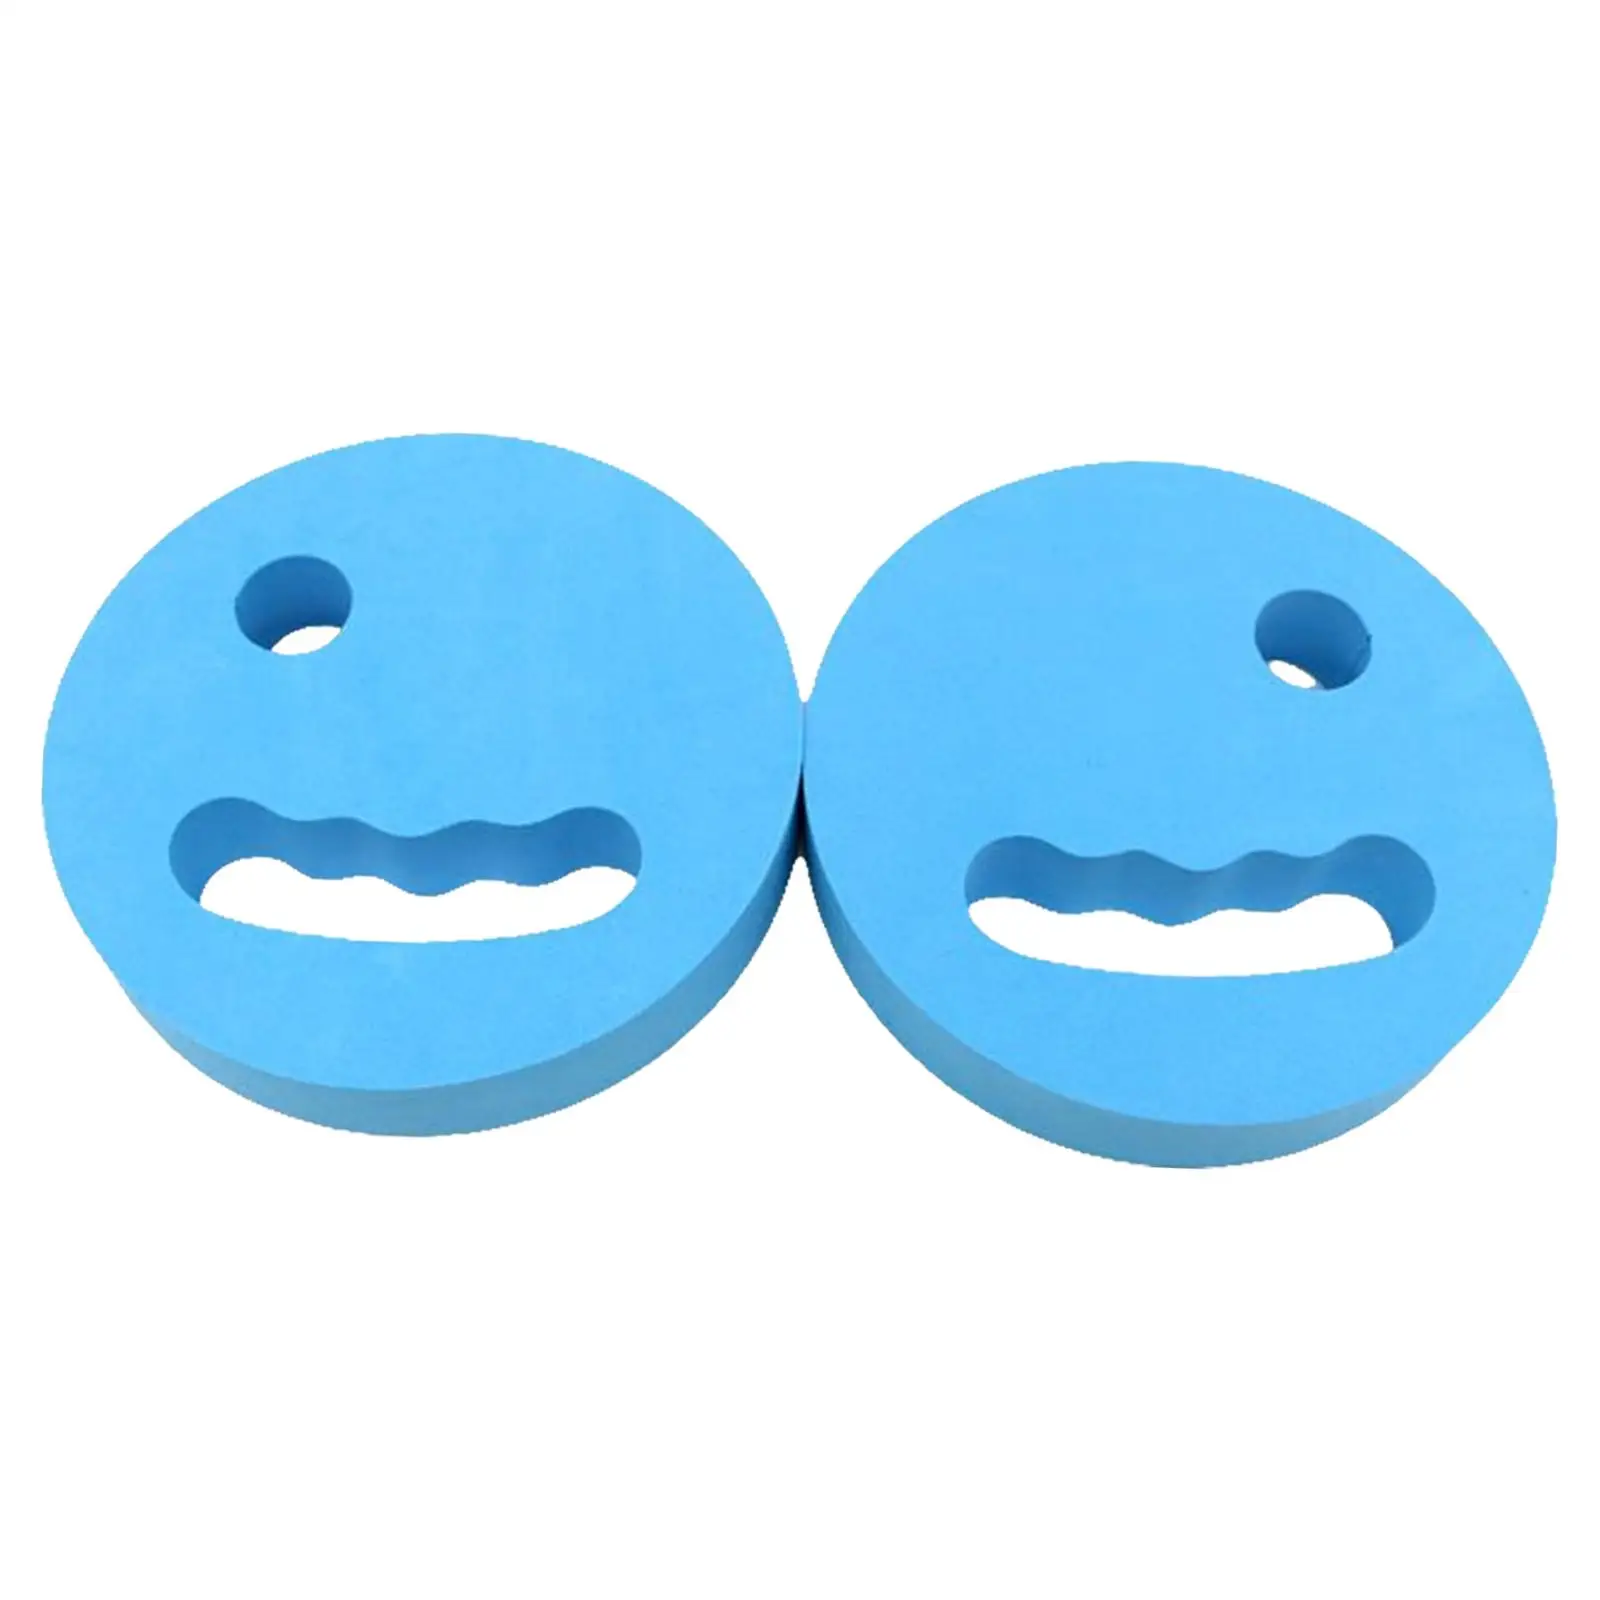 Swimming Hand Float Hand Paddle Floating Plate Floating Board for Children Boys Girls Swimmers Pool Accessories Water Sports